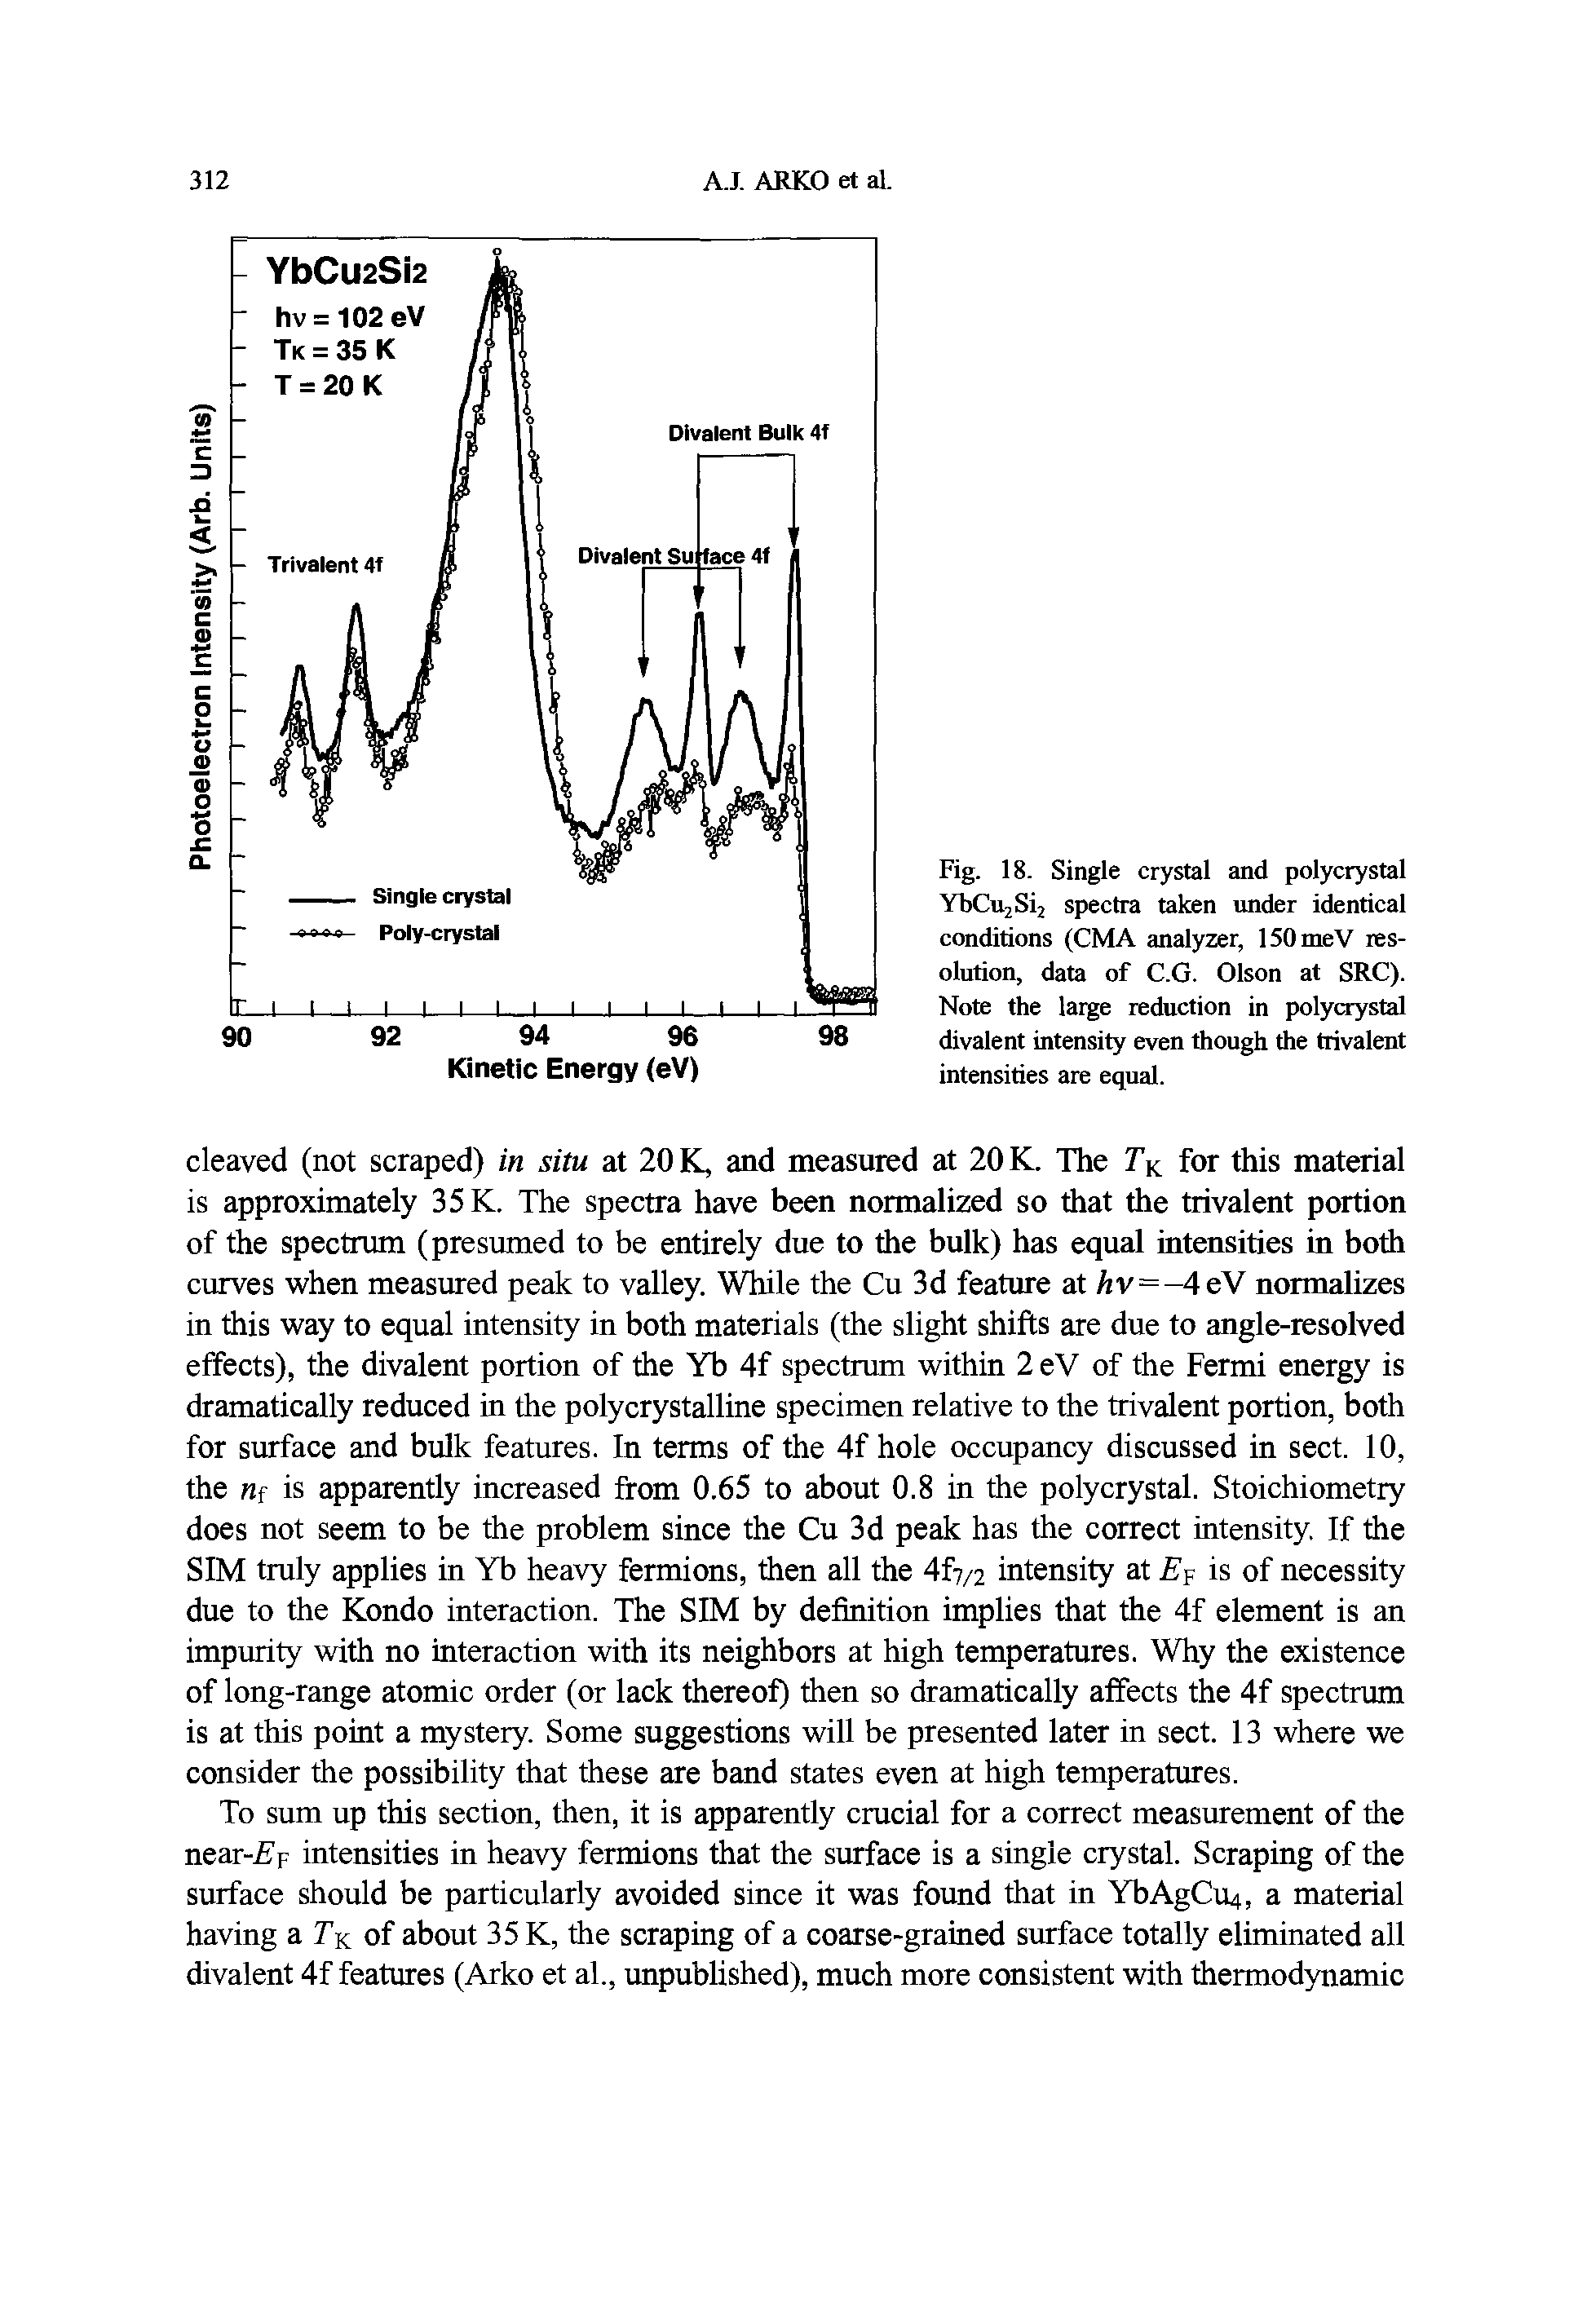 Fig. 18. Single crystal and polycrystal YbCu2Si2 spectra taken under identical conditions (CMA analyzer, ISOmeV resolution, data of C.G. Olson at SRC). Note the large reduction in polycrystal divalent intensity even though the (rivalent intensities are equal.